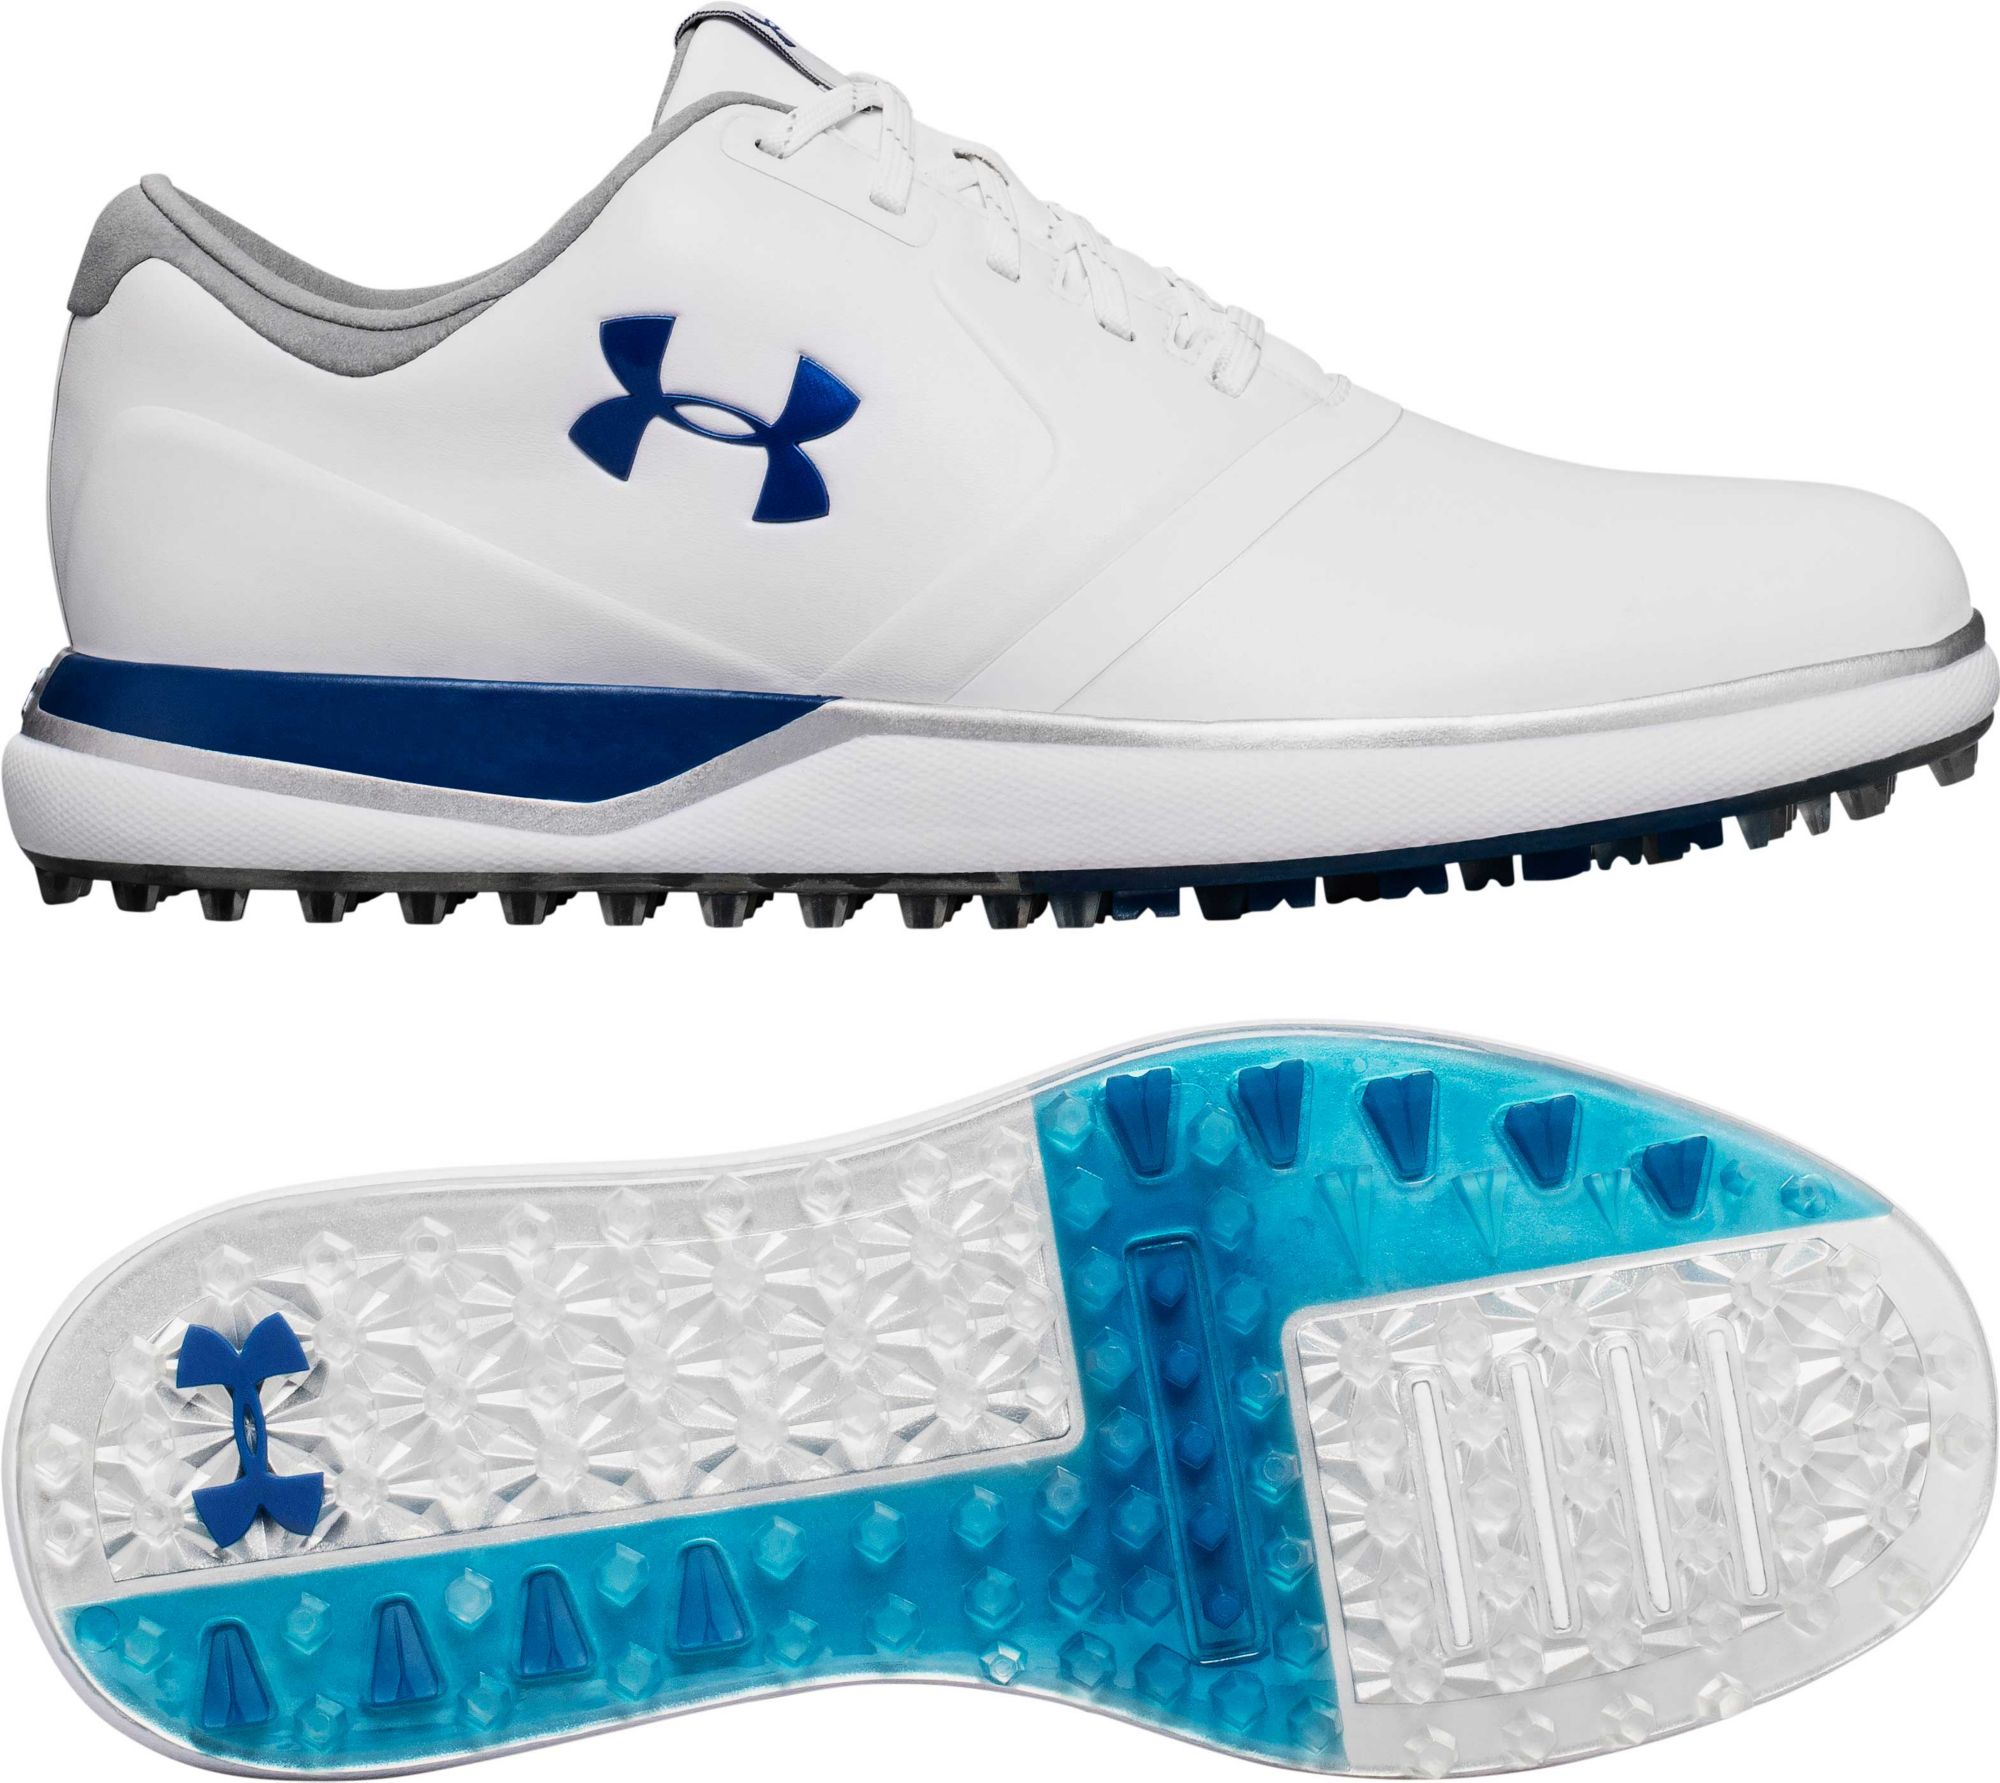 under armour leather shoes